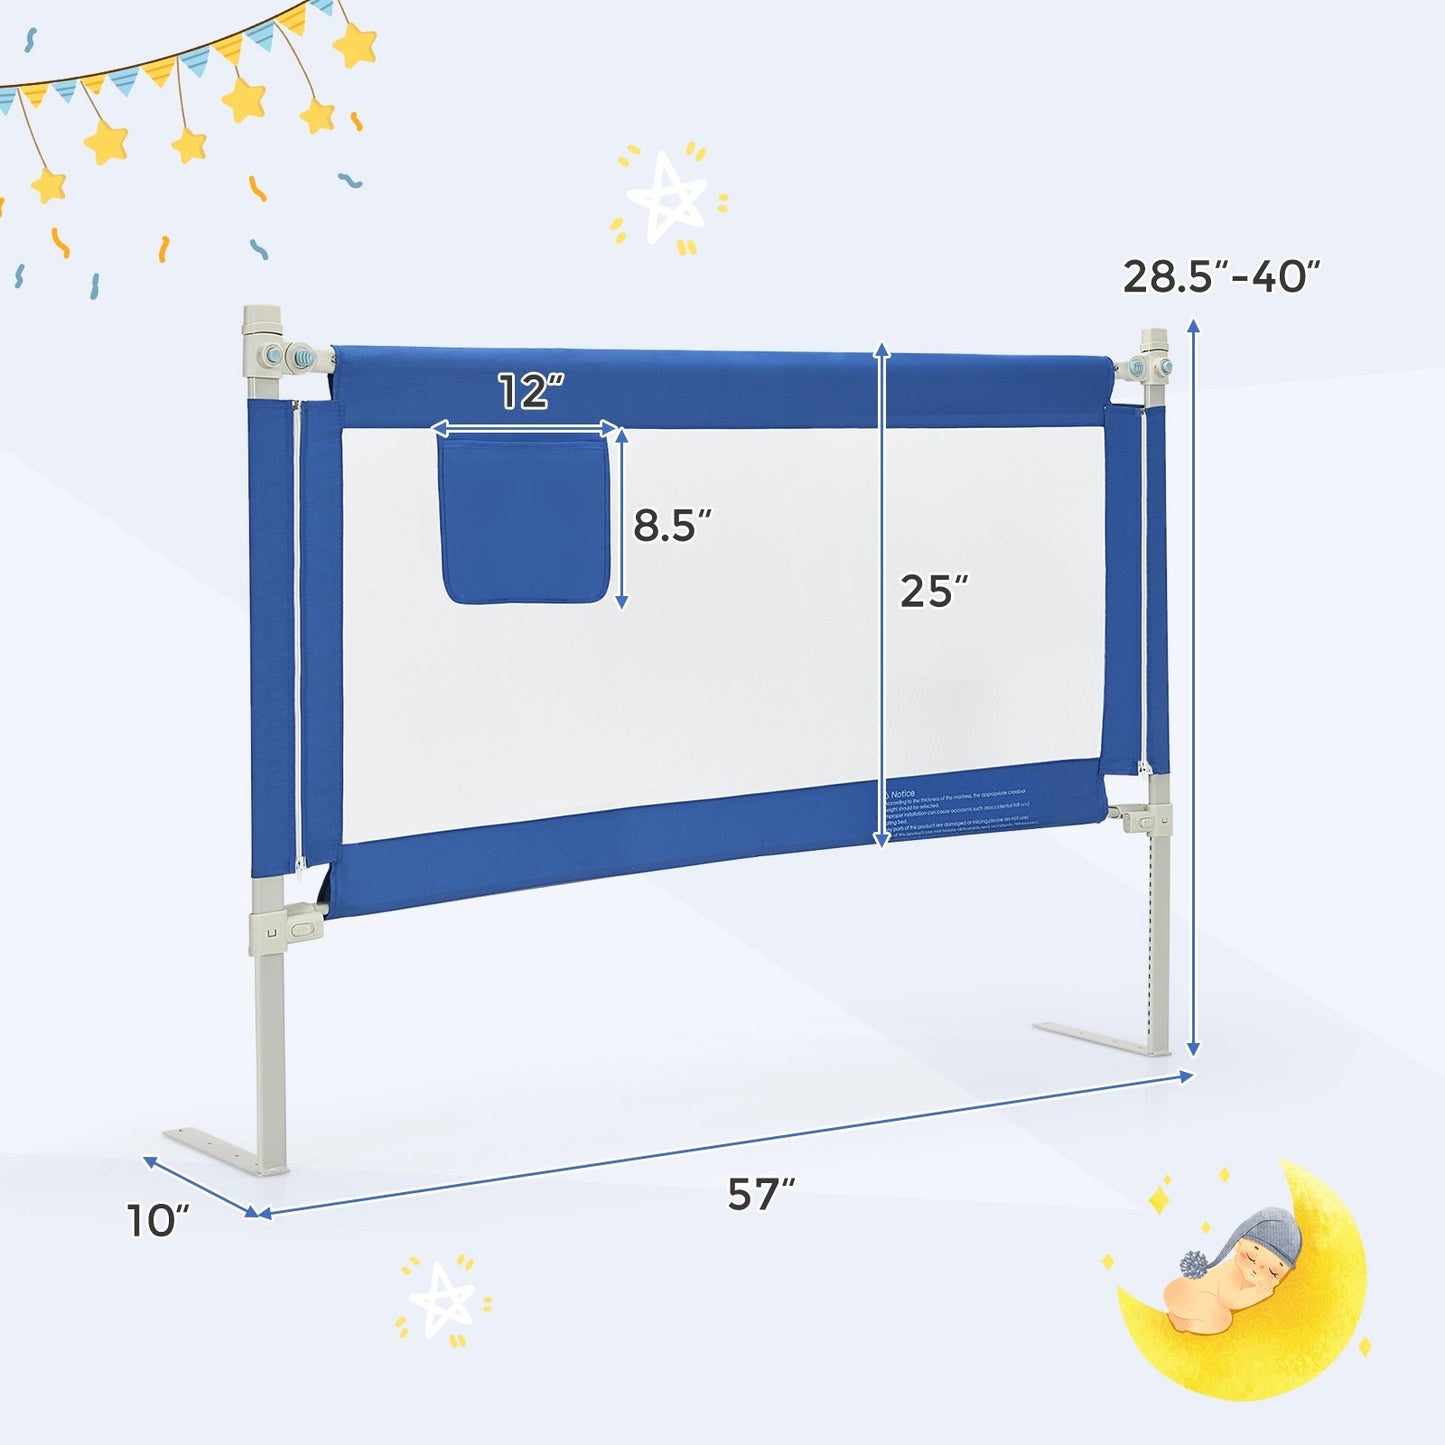 57 Inch Toddlers Vertical Lifting Baby Bed Rail Guard with Lock, Blue